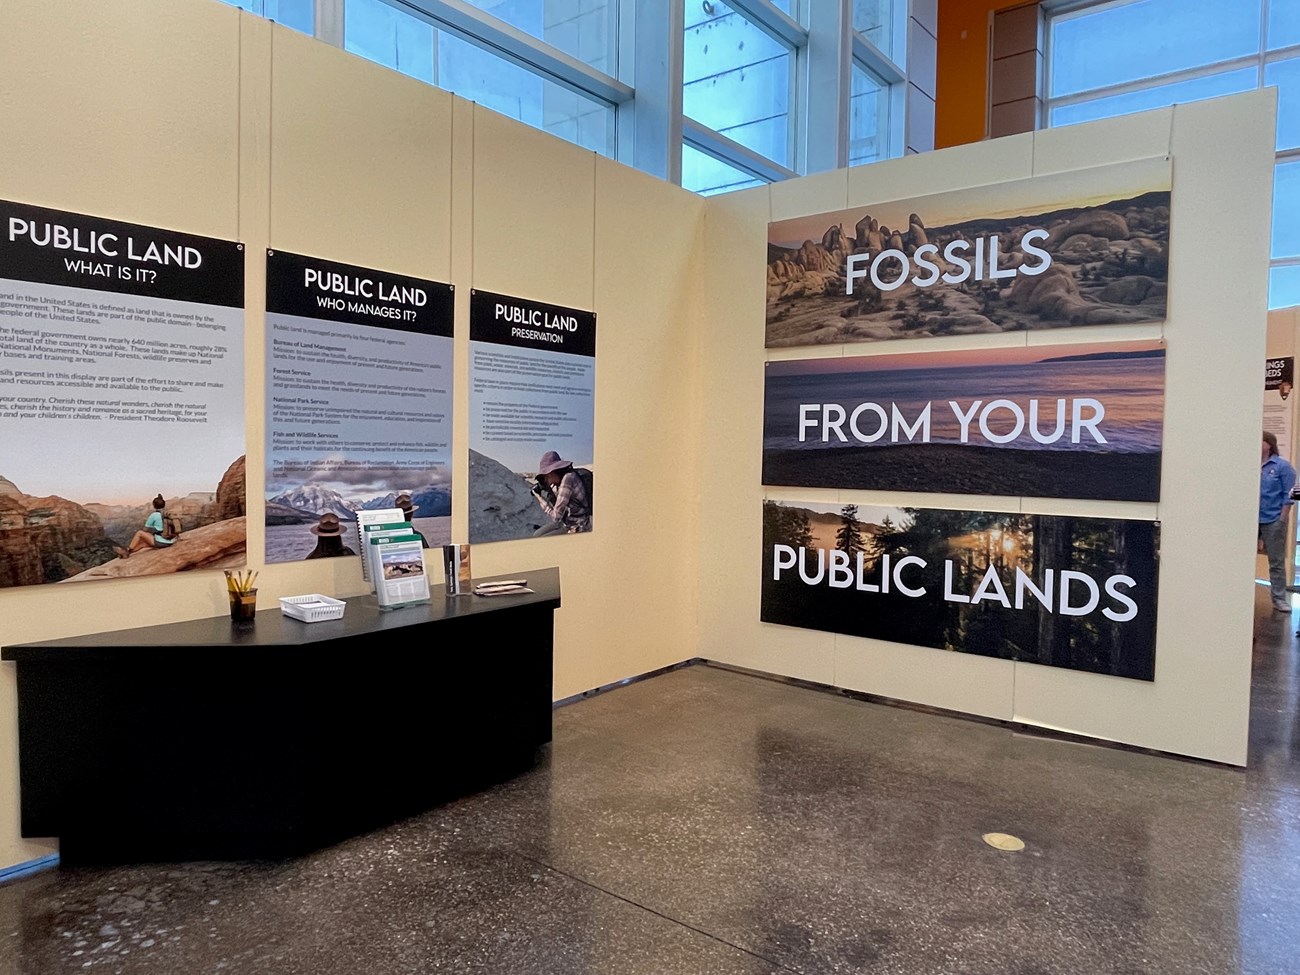 Photo of visitor center signs, "Fossils from your public lands".